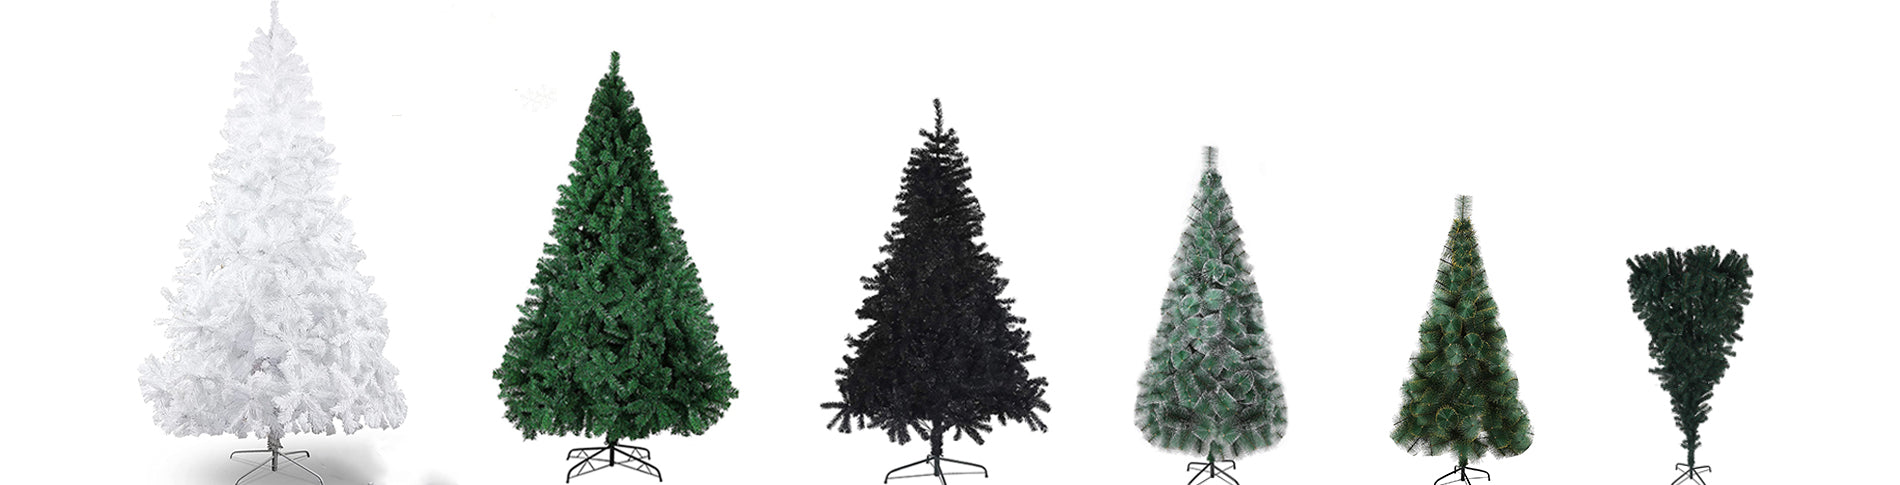 See our full selection of joyful Christmas Decorations and inspiring holiday decor,  Christmas trees, and many home accessories to keep your home festive year round!  You can shop Luckyerme for Christmas decor and holiday gifts you will love at great low prices. Free shipping on all orders.